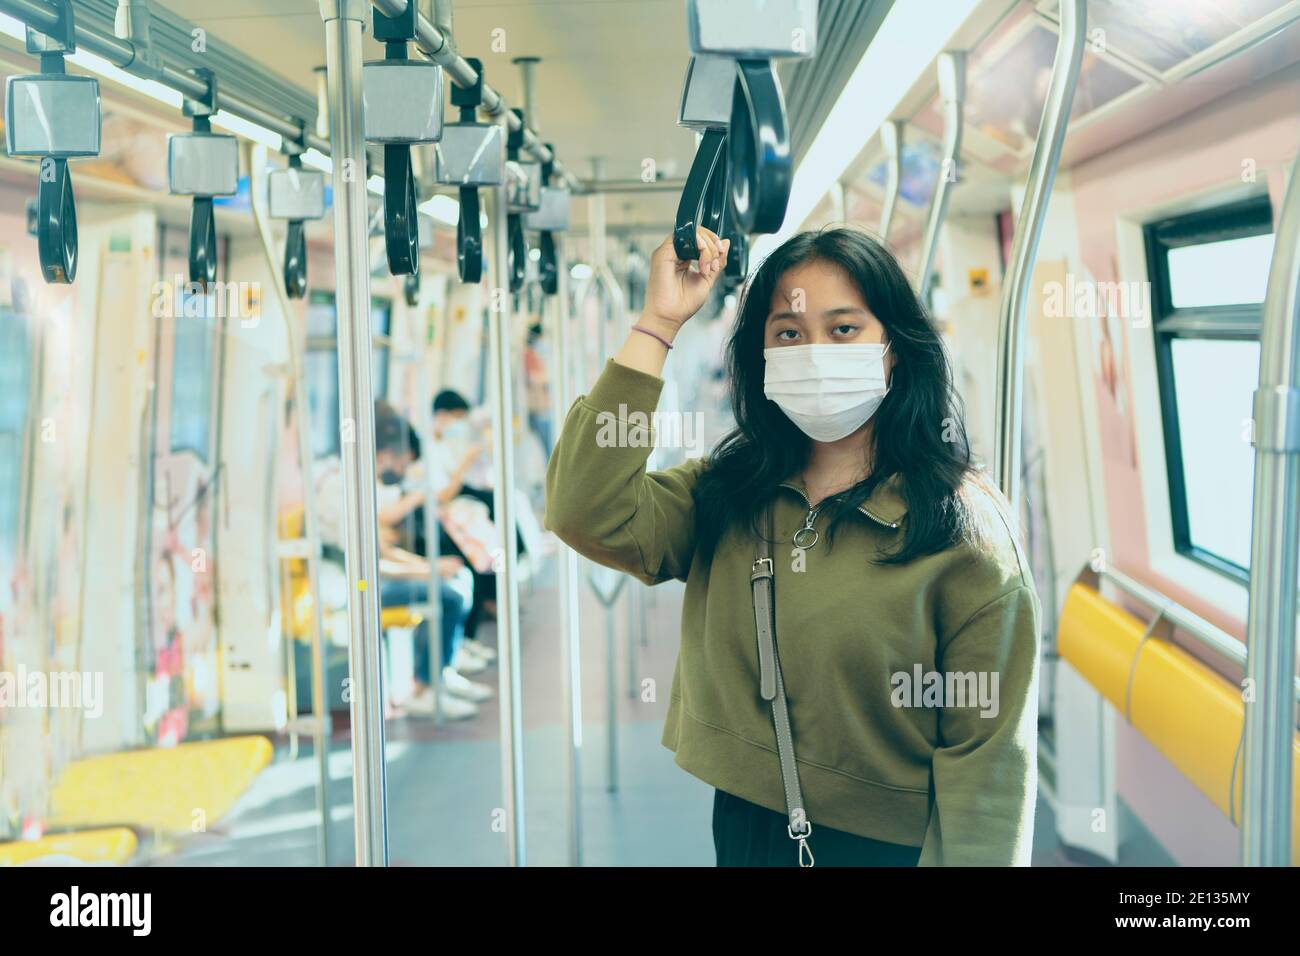 asian woman wearing protection mask standing in  city sky trains Stock Photo